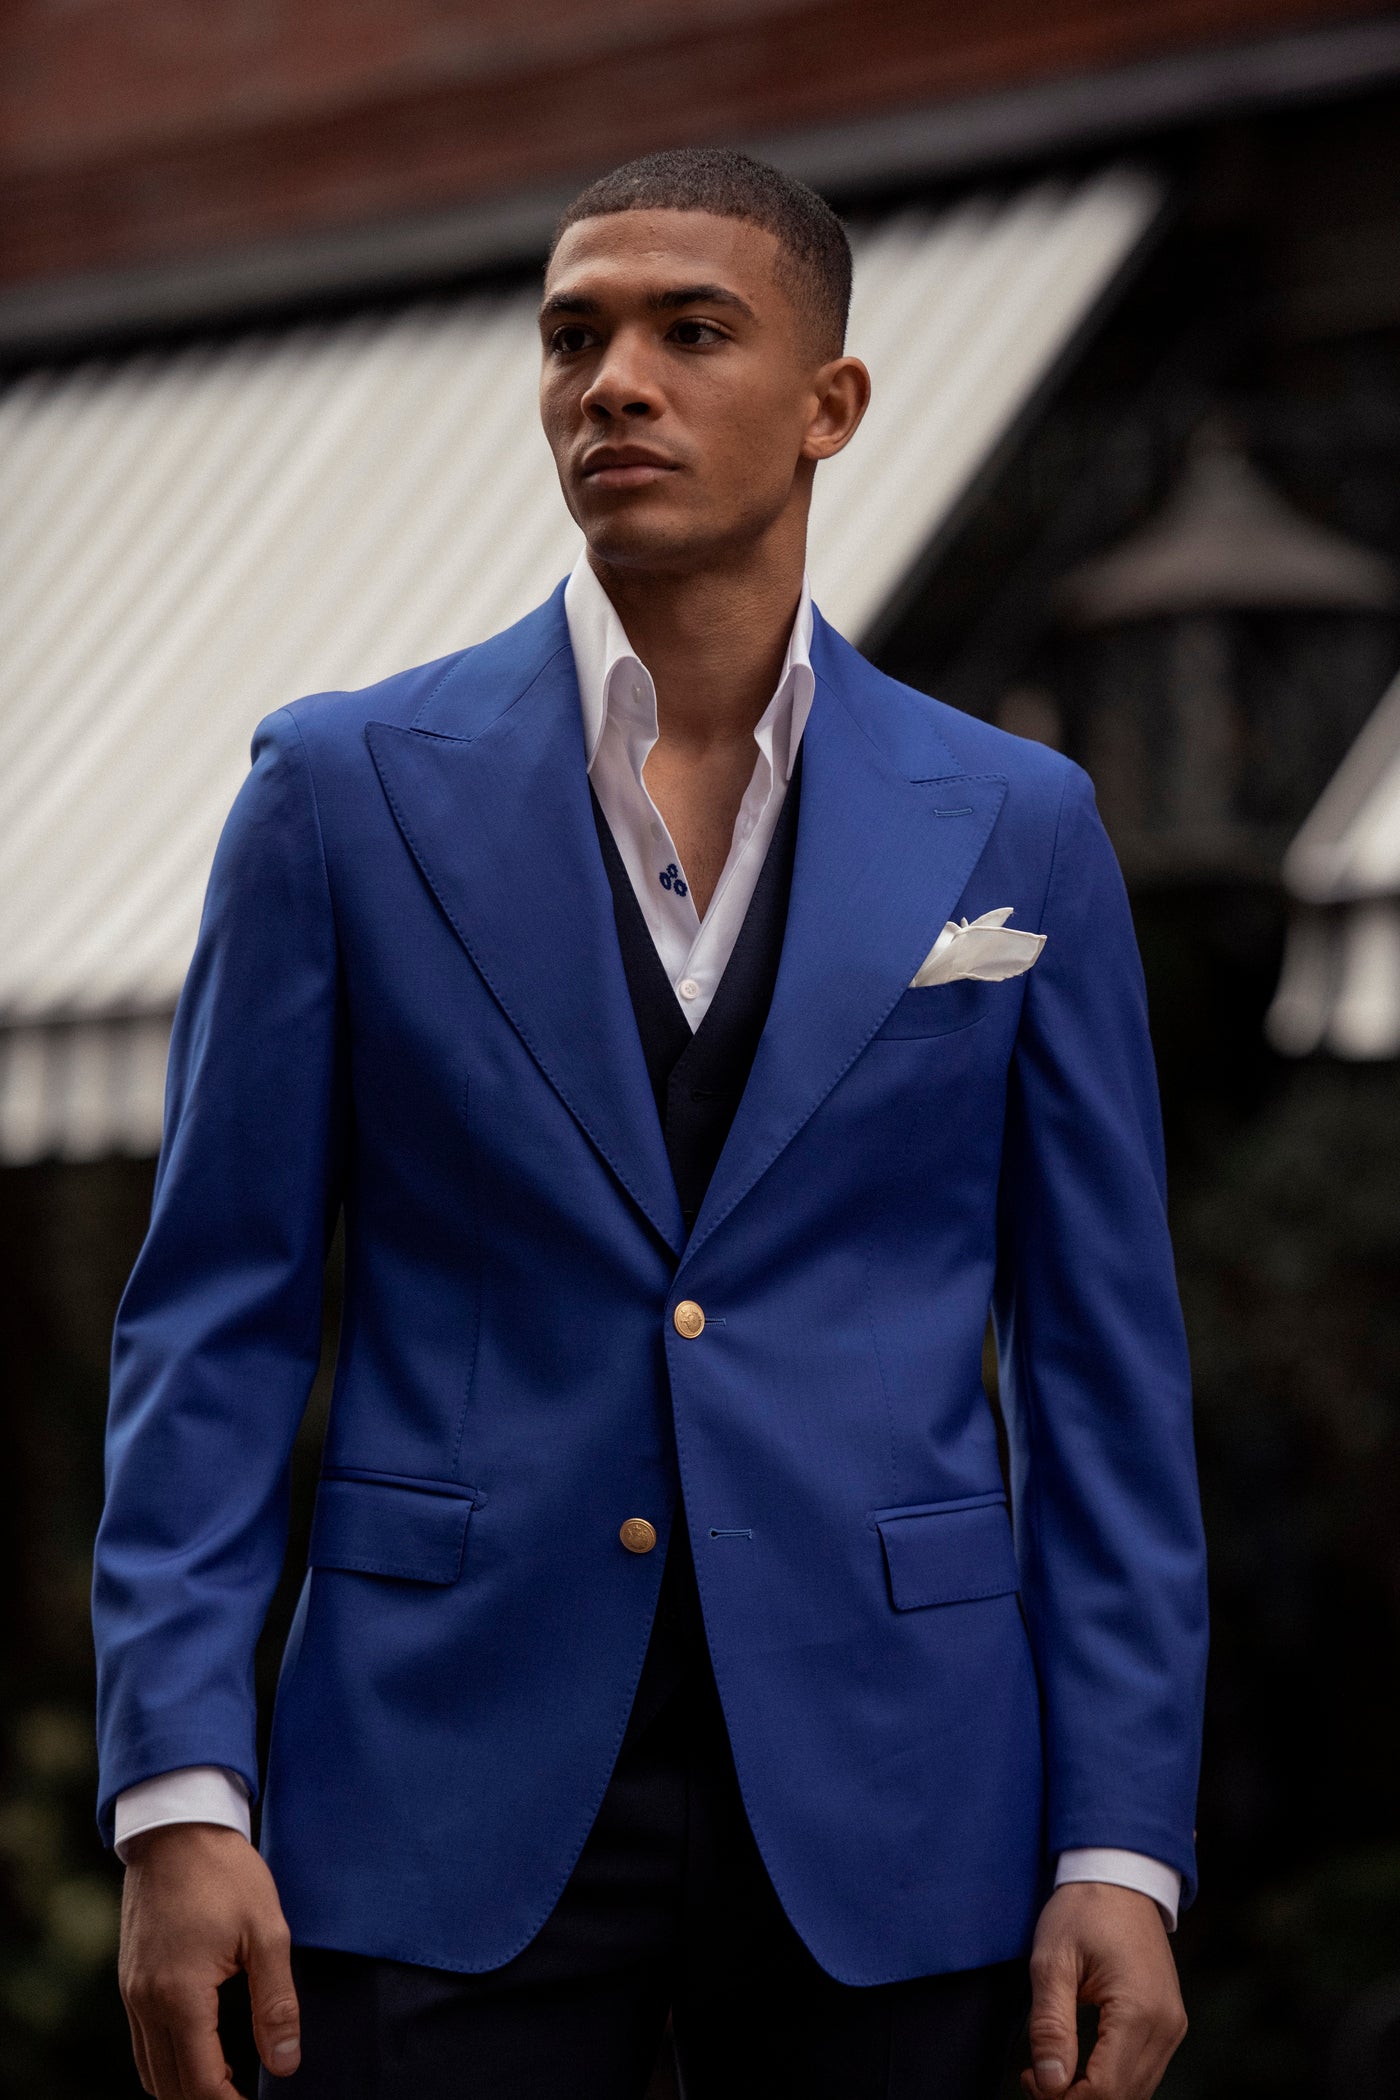 Royal blue jacket, tailored fit